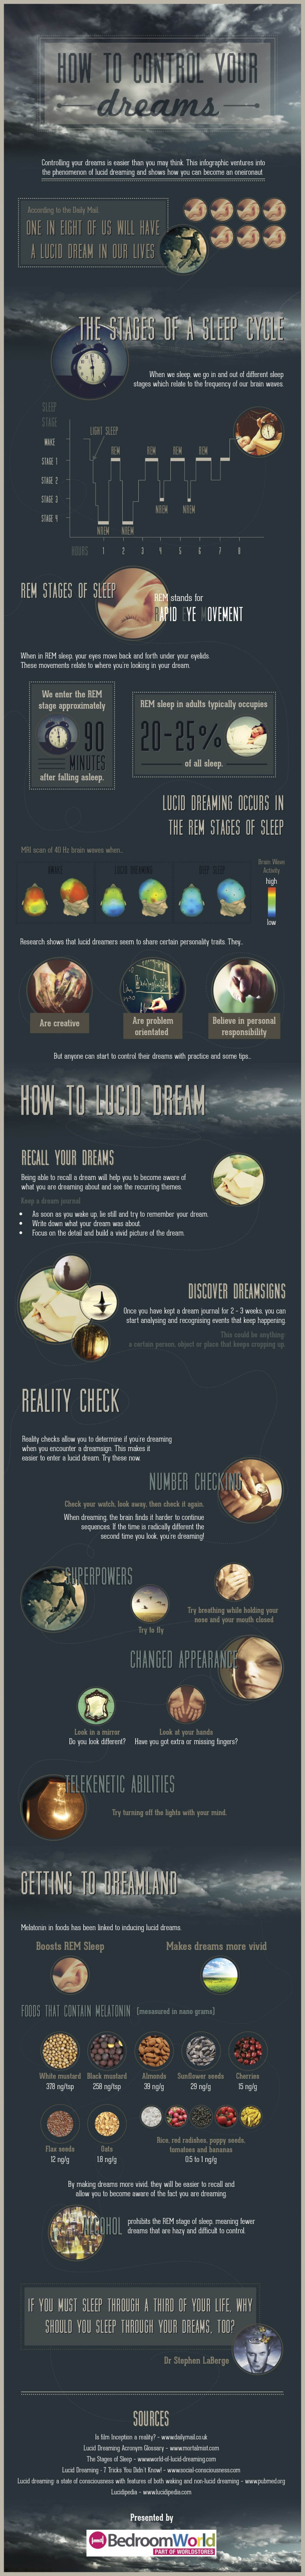 The things that you should do in order to experience lucid dreaming infographic